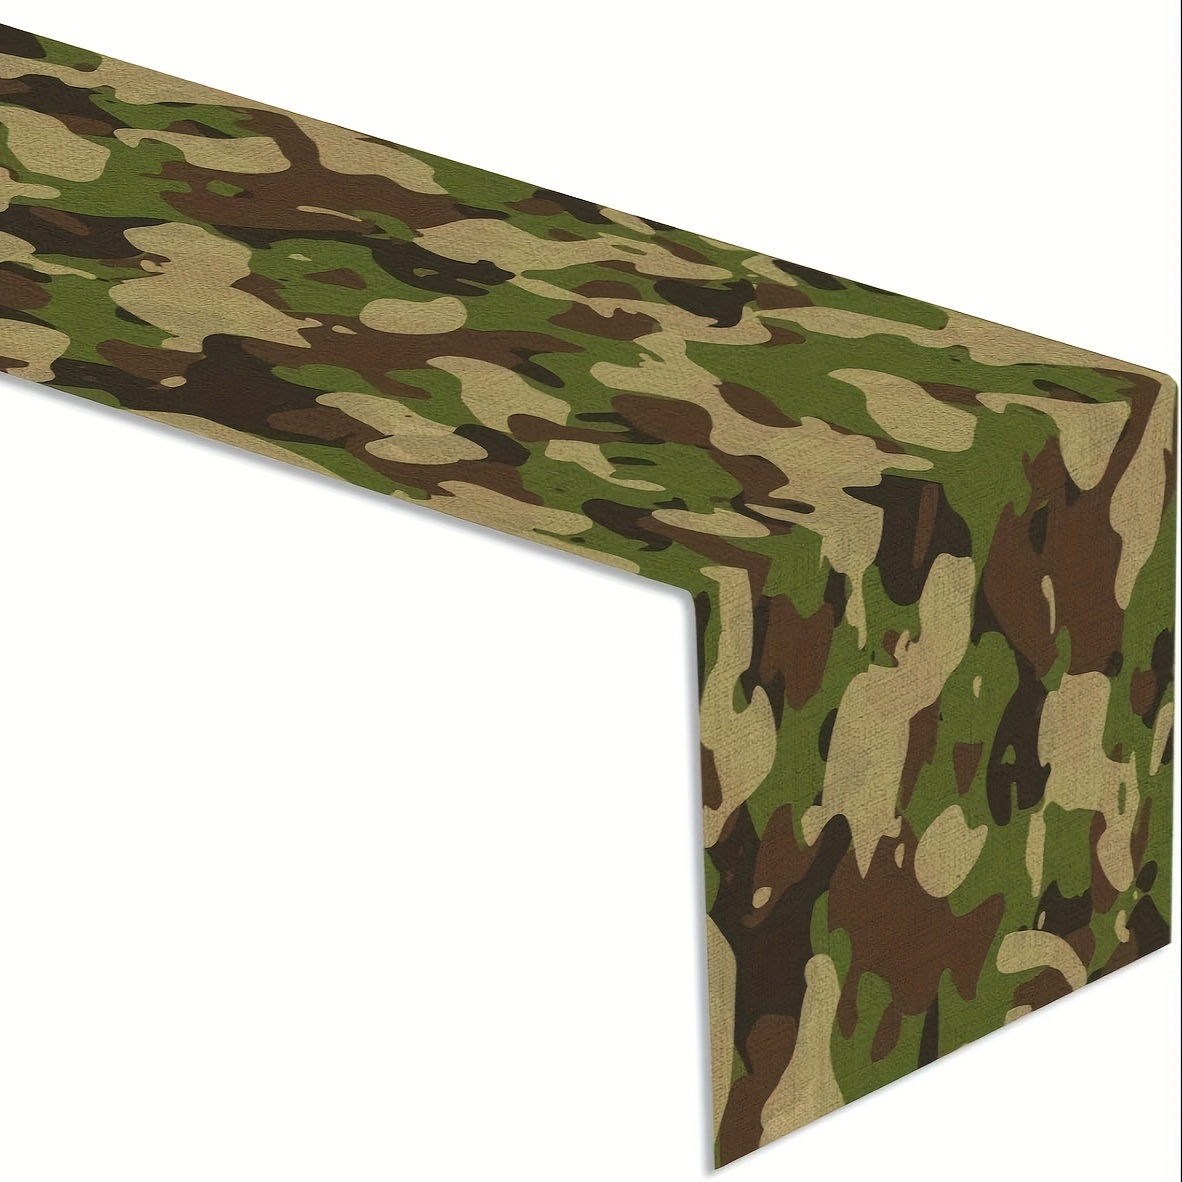 

1pc, Table Runner, Camo Table Runner, Army Military Camouflage Soldier Hunting Themed Table Decor, Birthday Party Dinner Table Decoration For Home, Kitchen Dining Table Decor